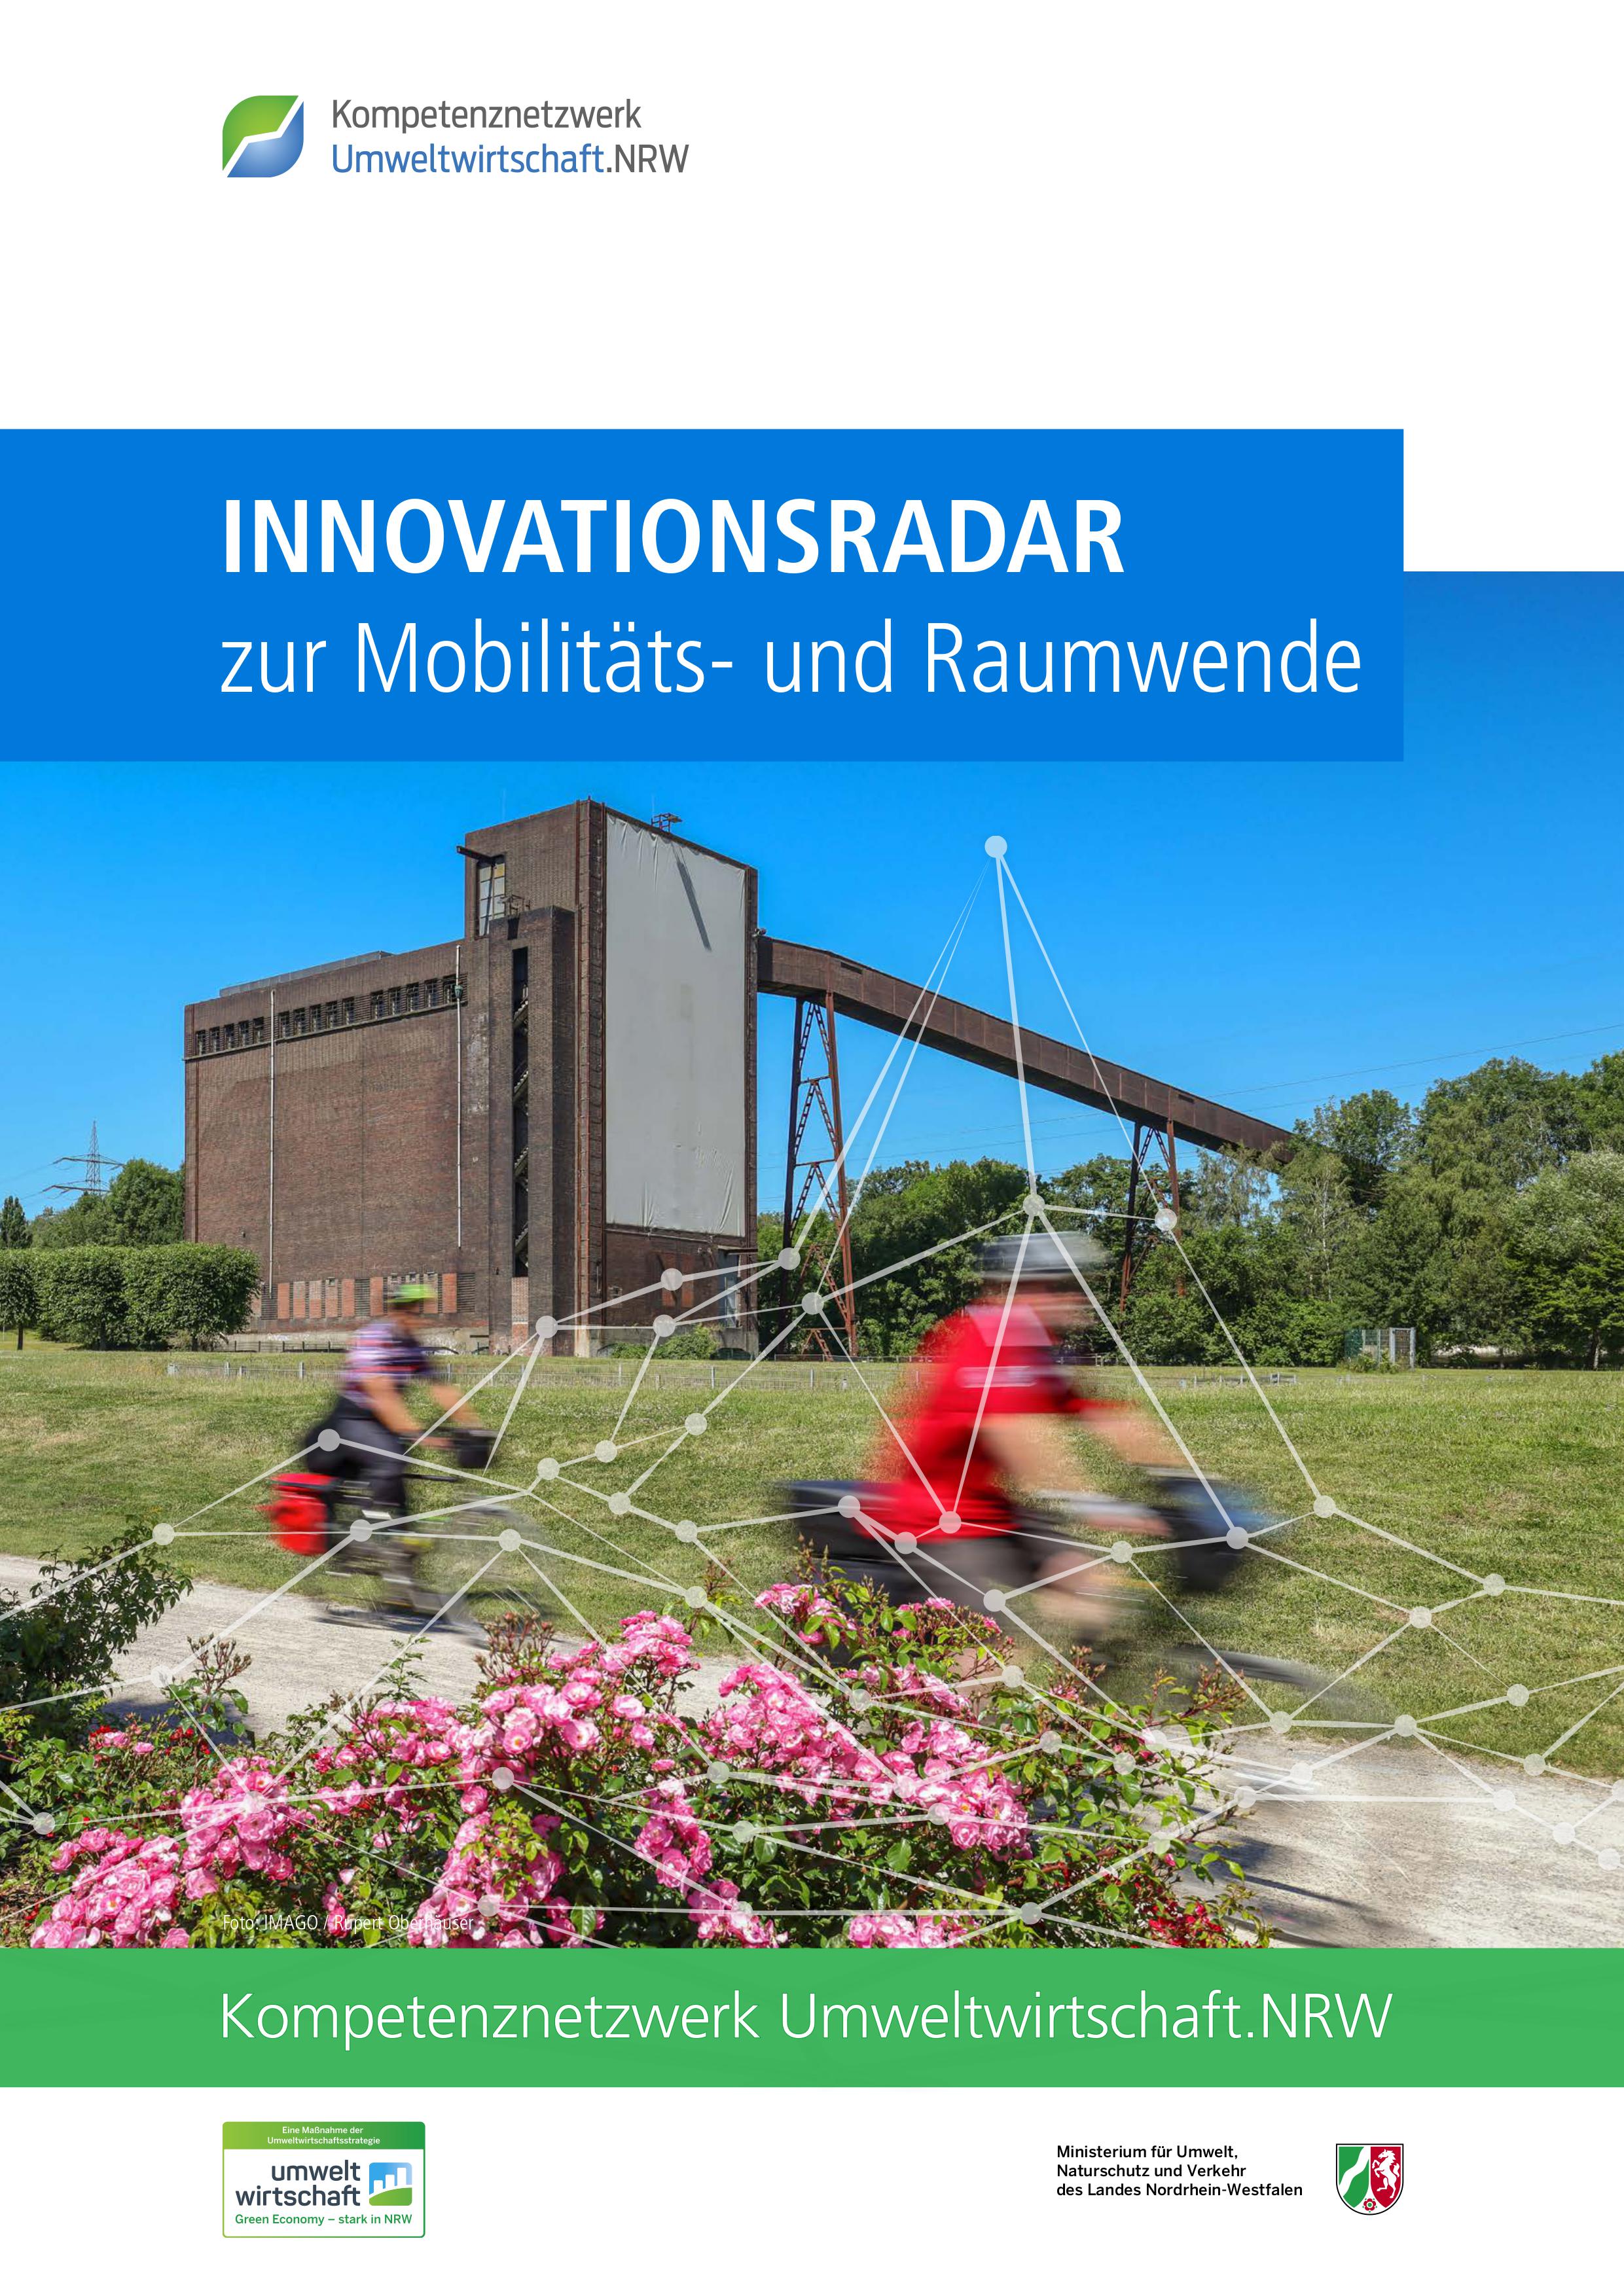 The picture shows the cover of the Innovation Radar on mobility and spatial turnaround 